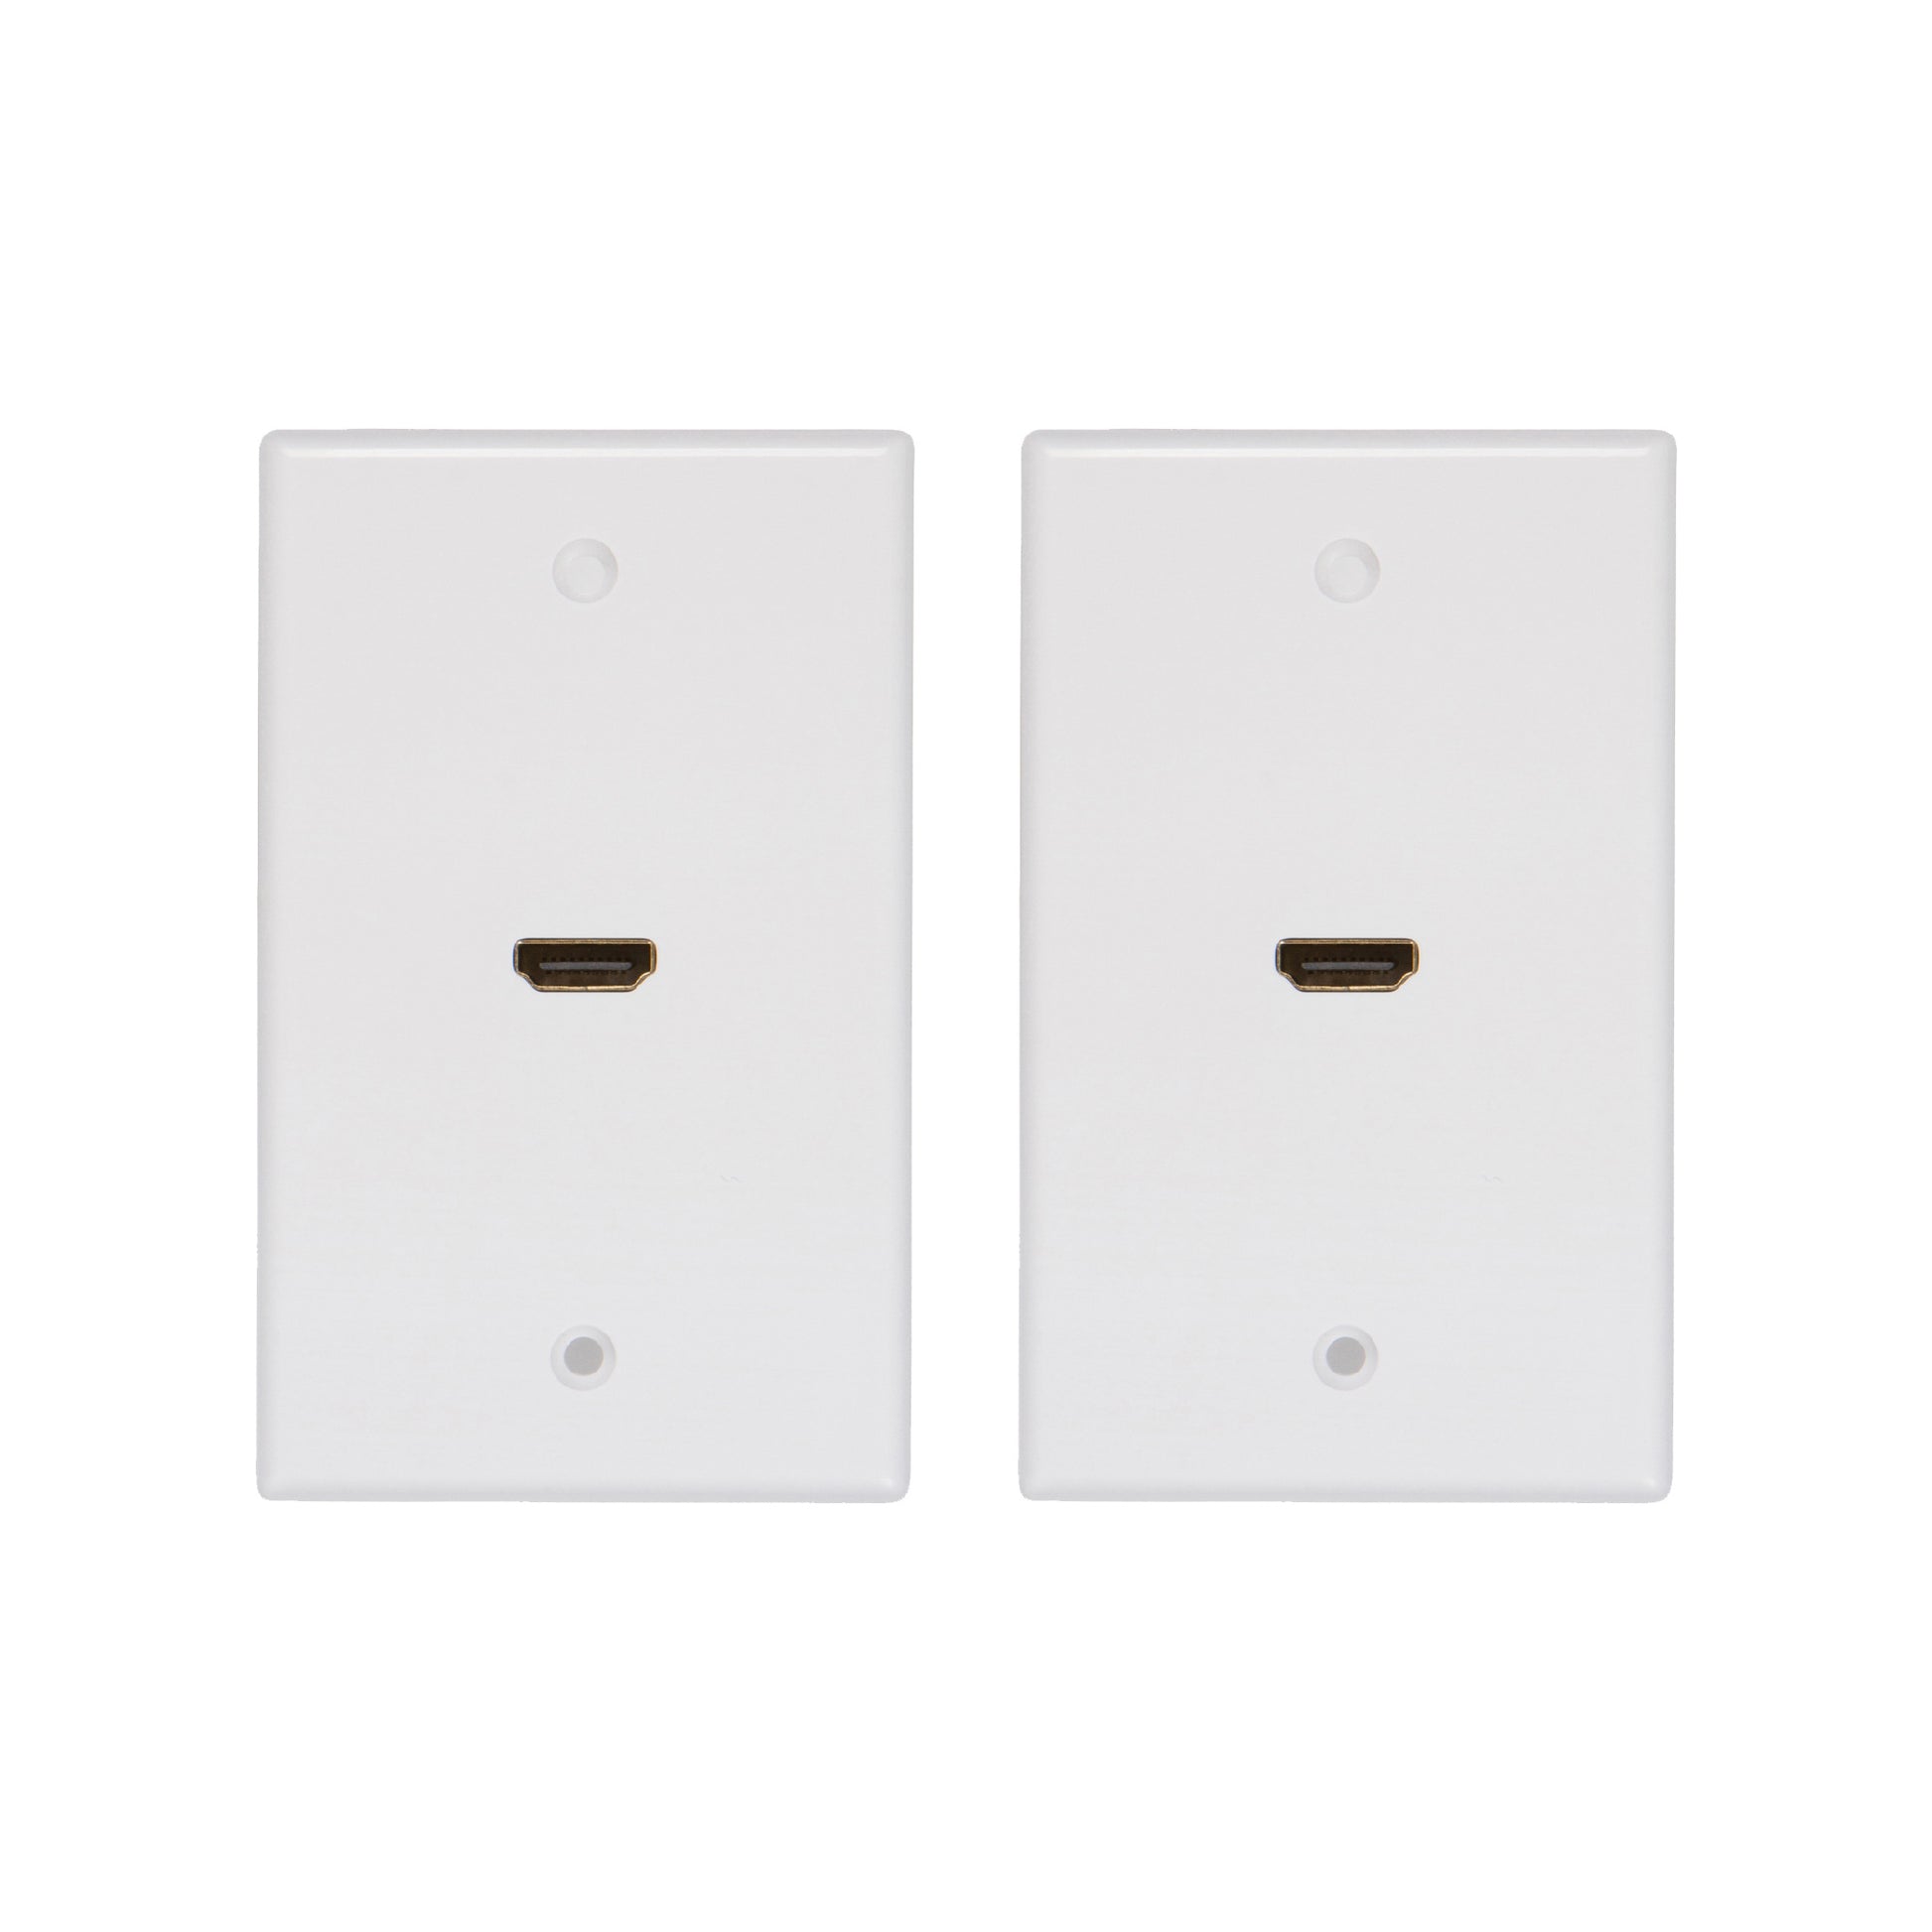 1 Port HDMI Wall Plate [UL Listed] Insert Built-in Hi-Speed HDMI Cable with Ethernet- Decora Style Jack/Plug for Outlet Port (White 1 Port) - Milena International Inc